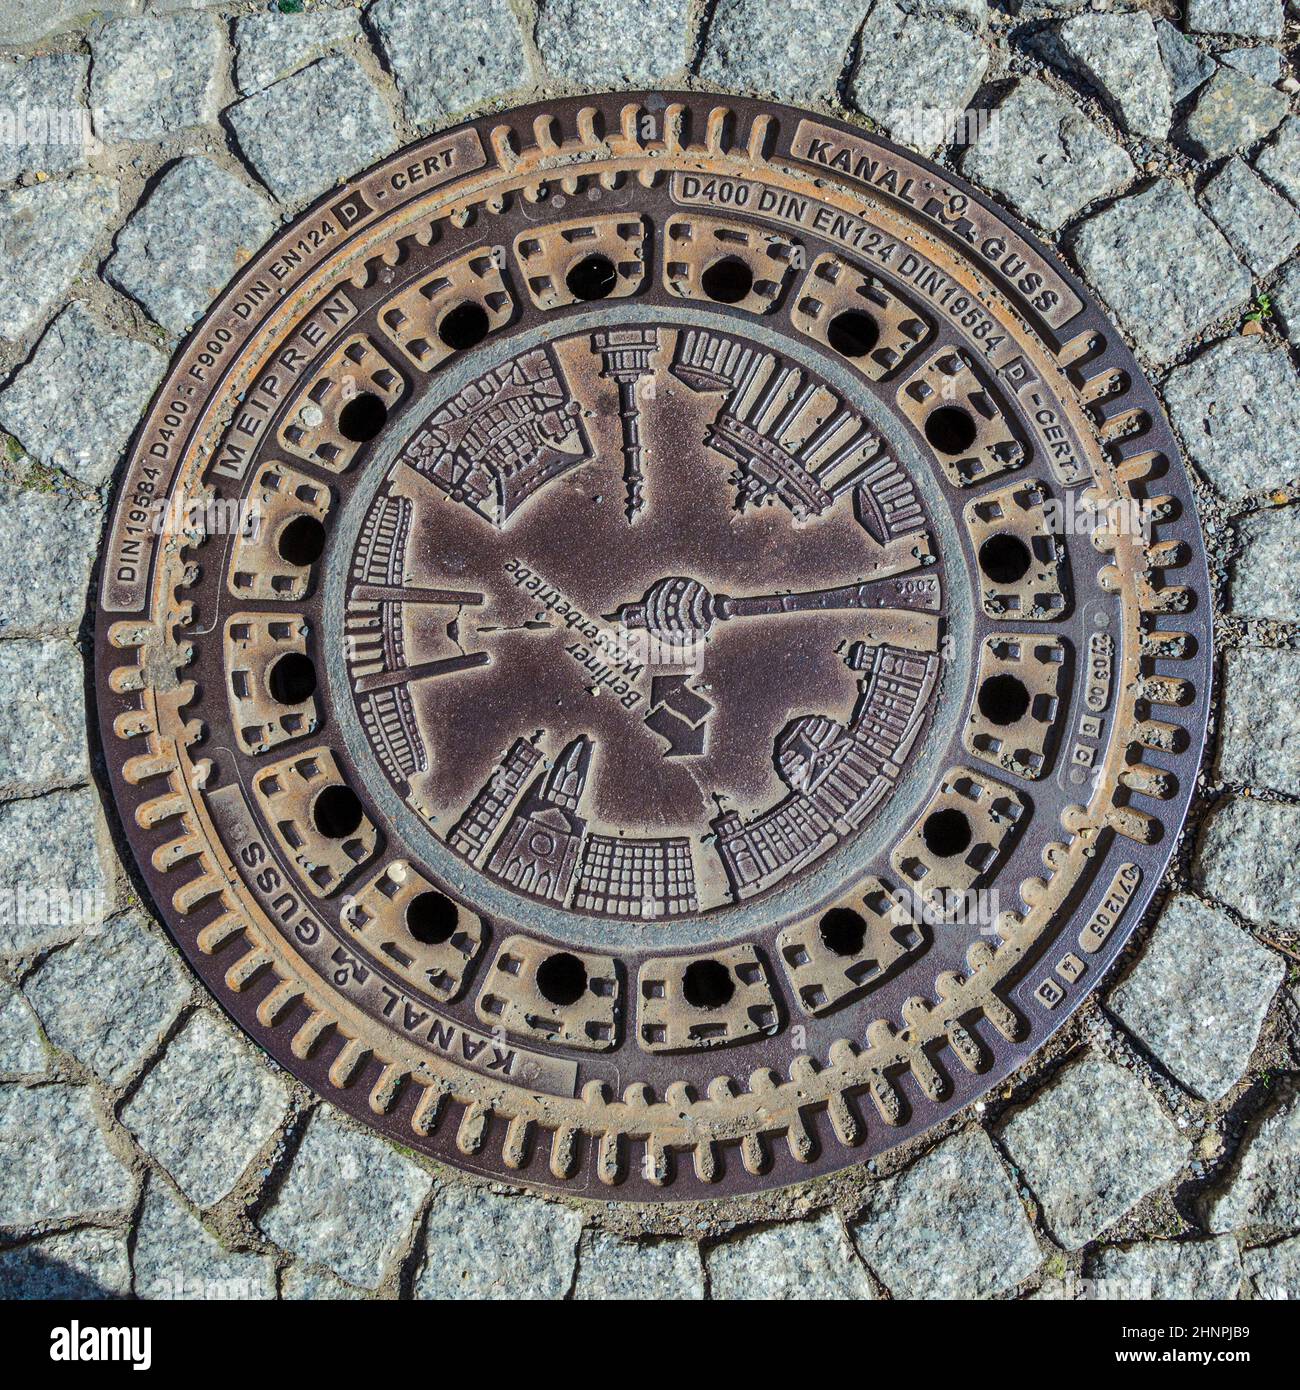 ron plate at entrance to sewage system with emblem of landmarks in Berlin Stock Photo